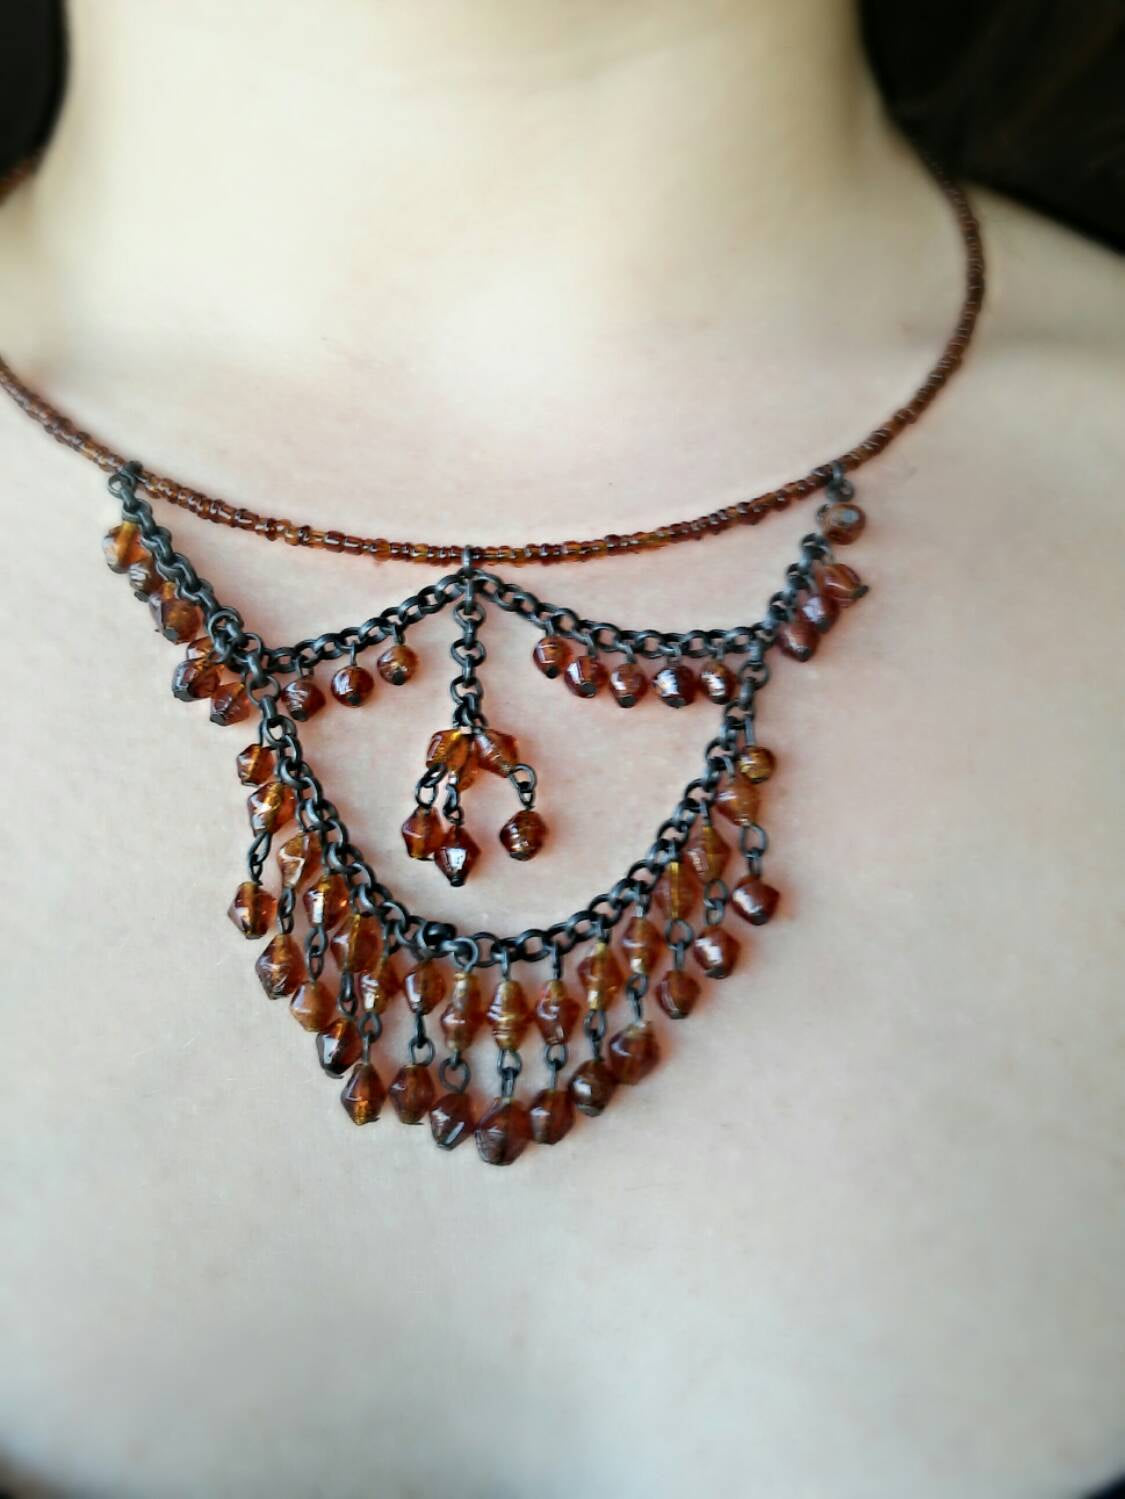 OOAK Boho brown layered necklace/boho birthday gift/layered necklace/gift for her/birthday necklace/rustic necklace/Christmas bohemian gift